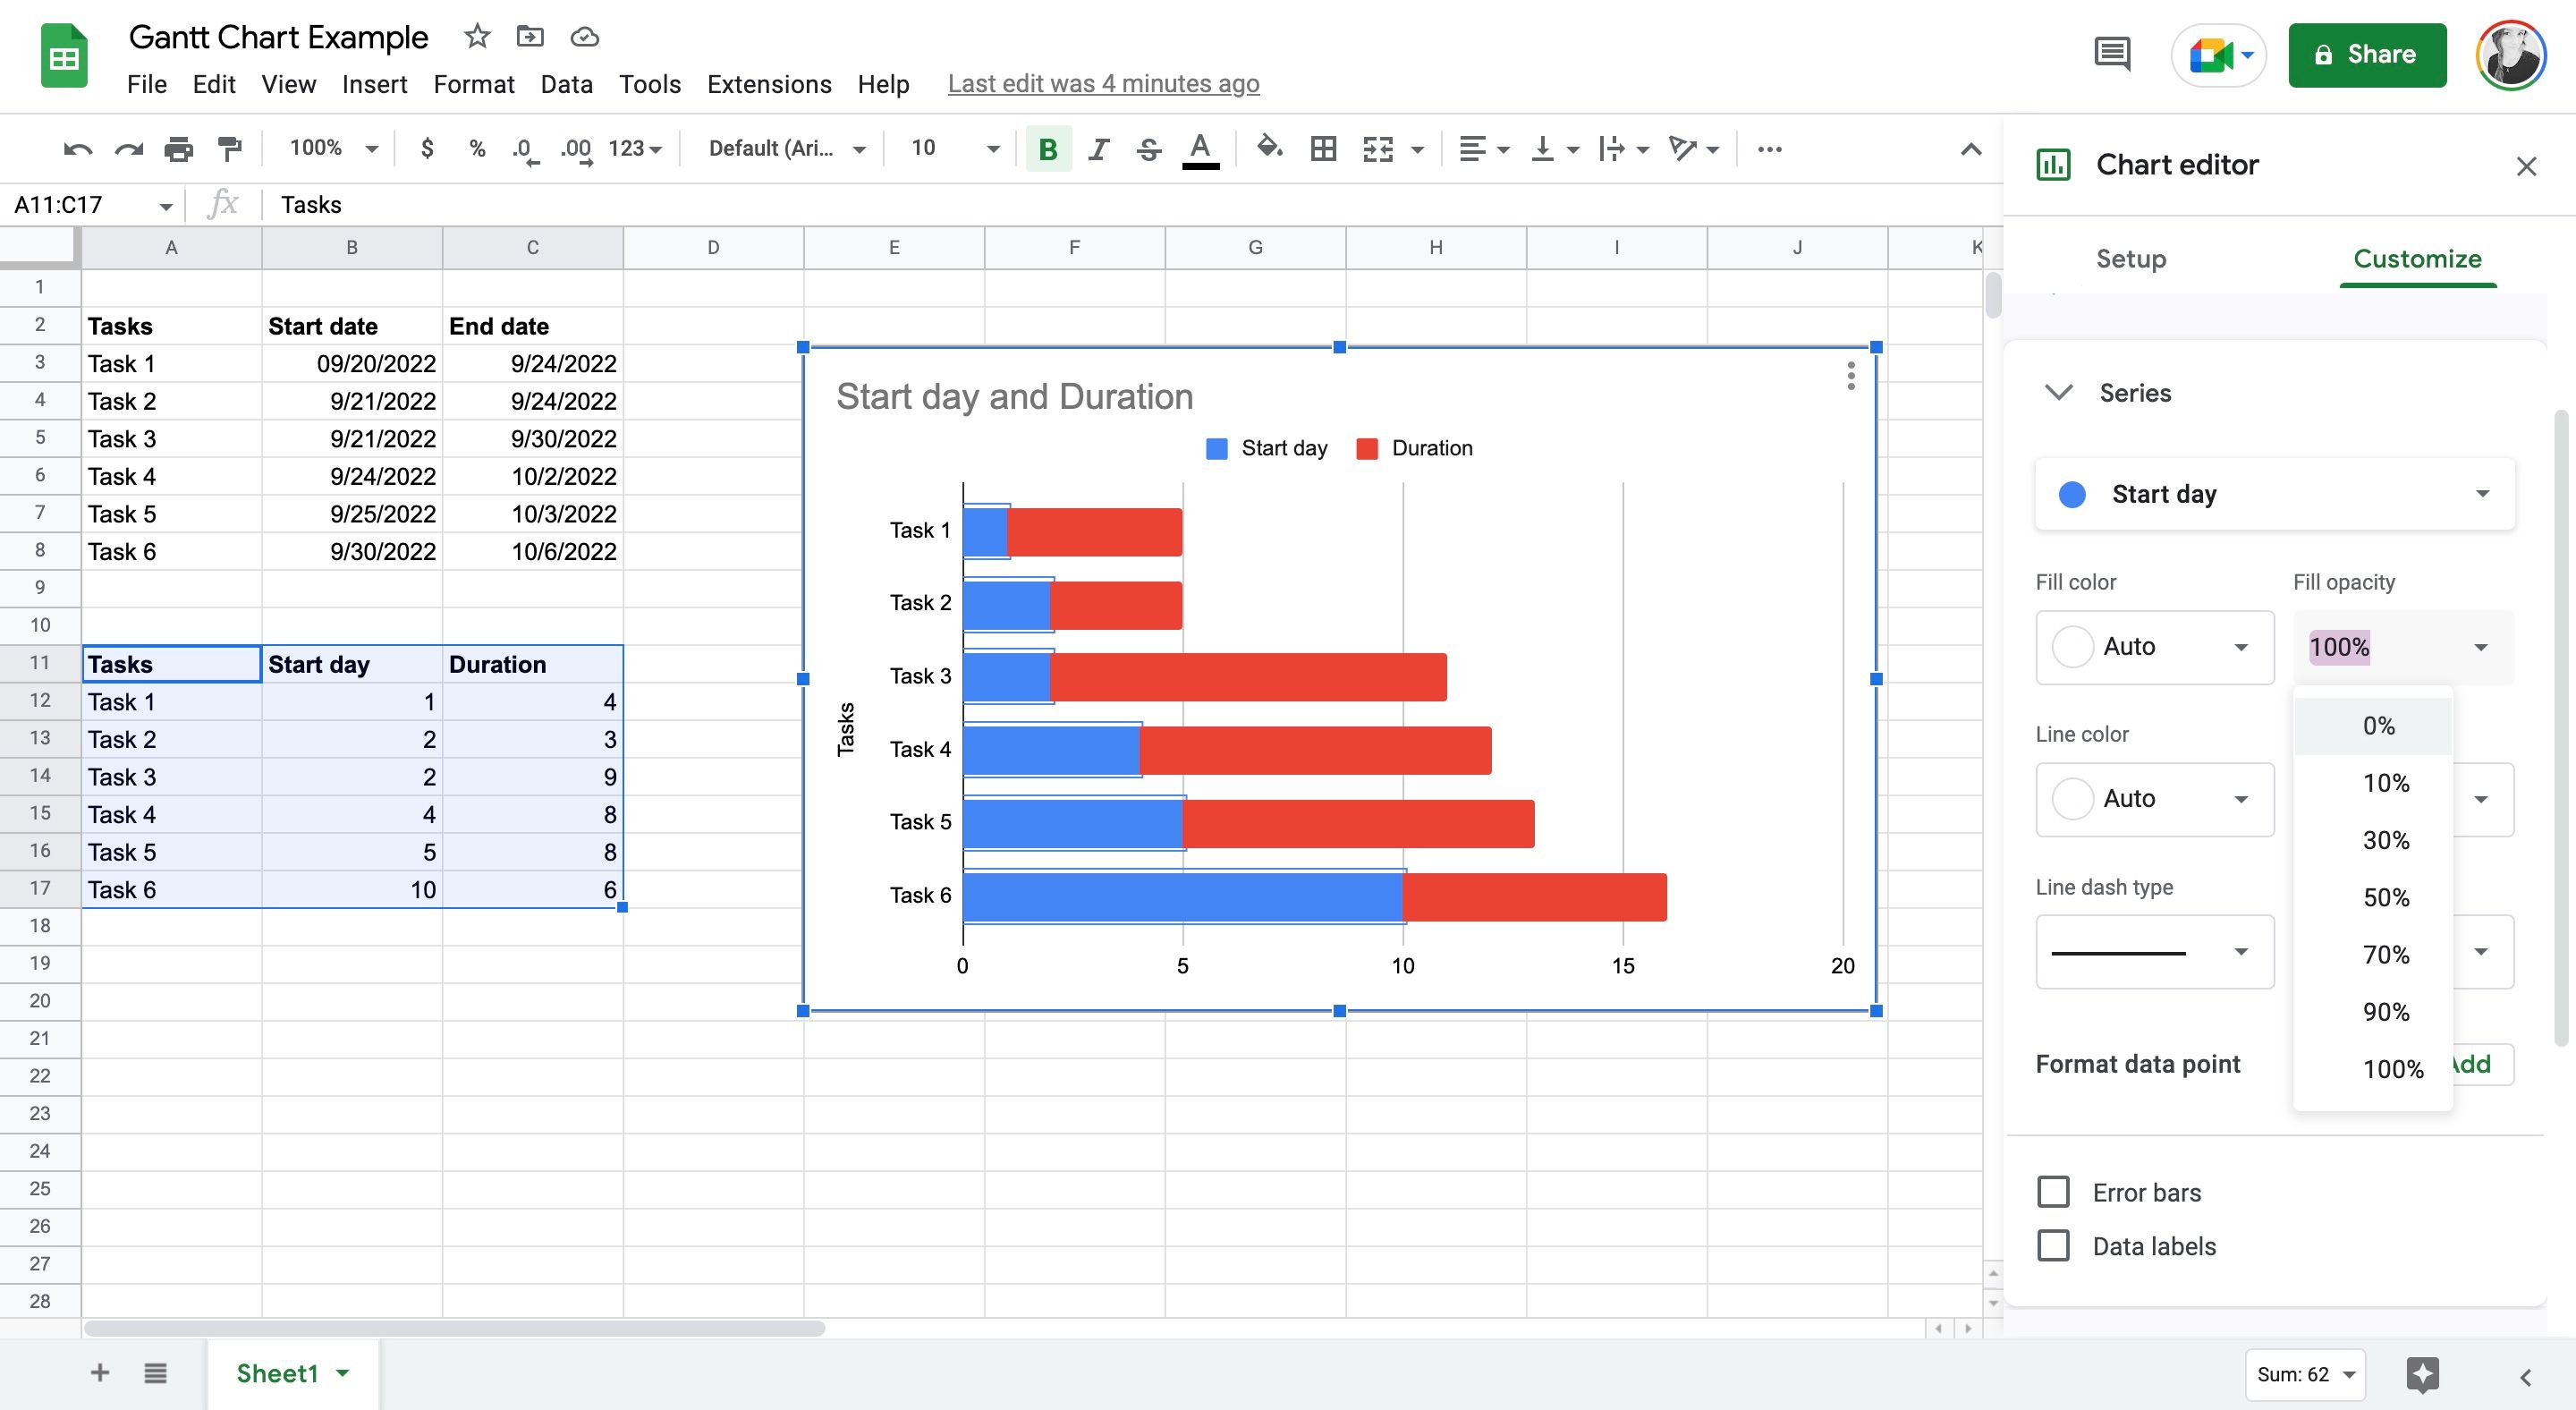 Converting a bar graph to a Gantt in Sheets by hiding stacked bars